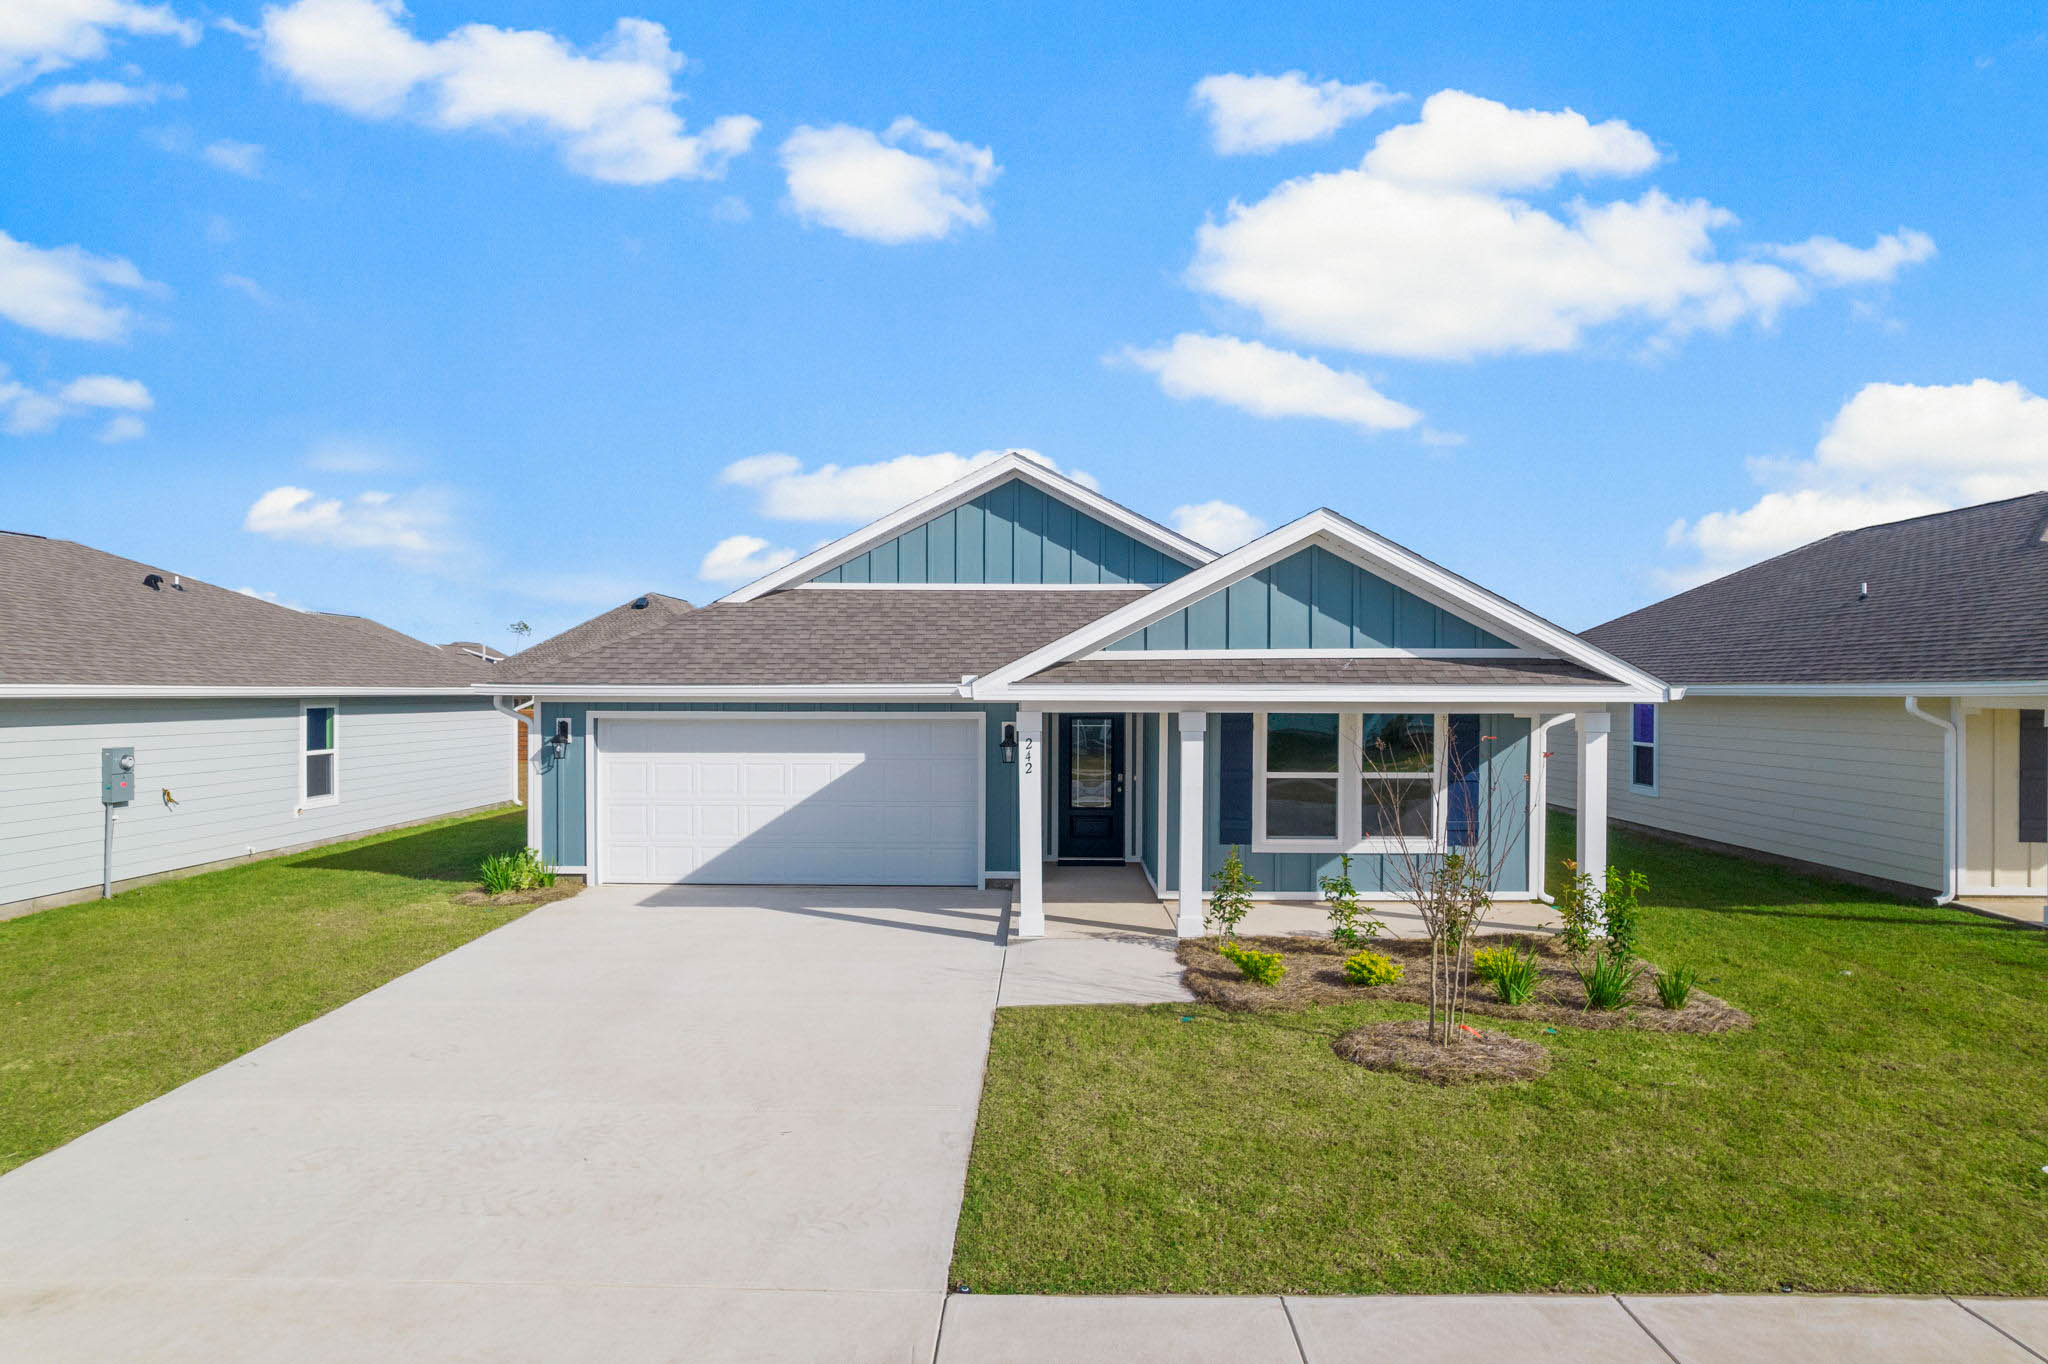 Blue Lakeside five bedroom floorplan with luscious green grass and blue sky in background